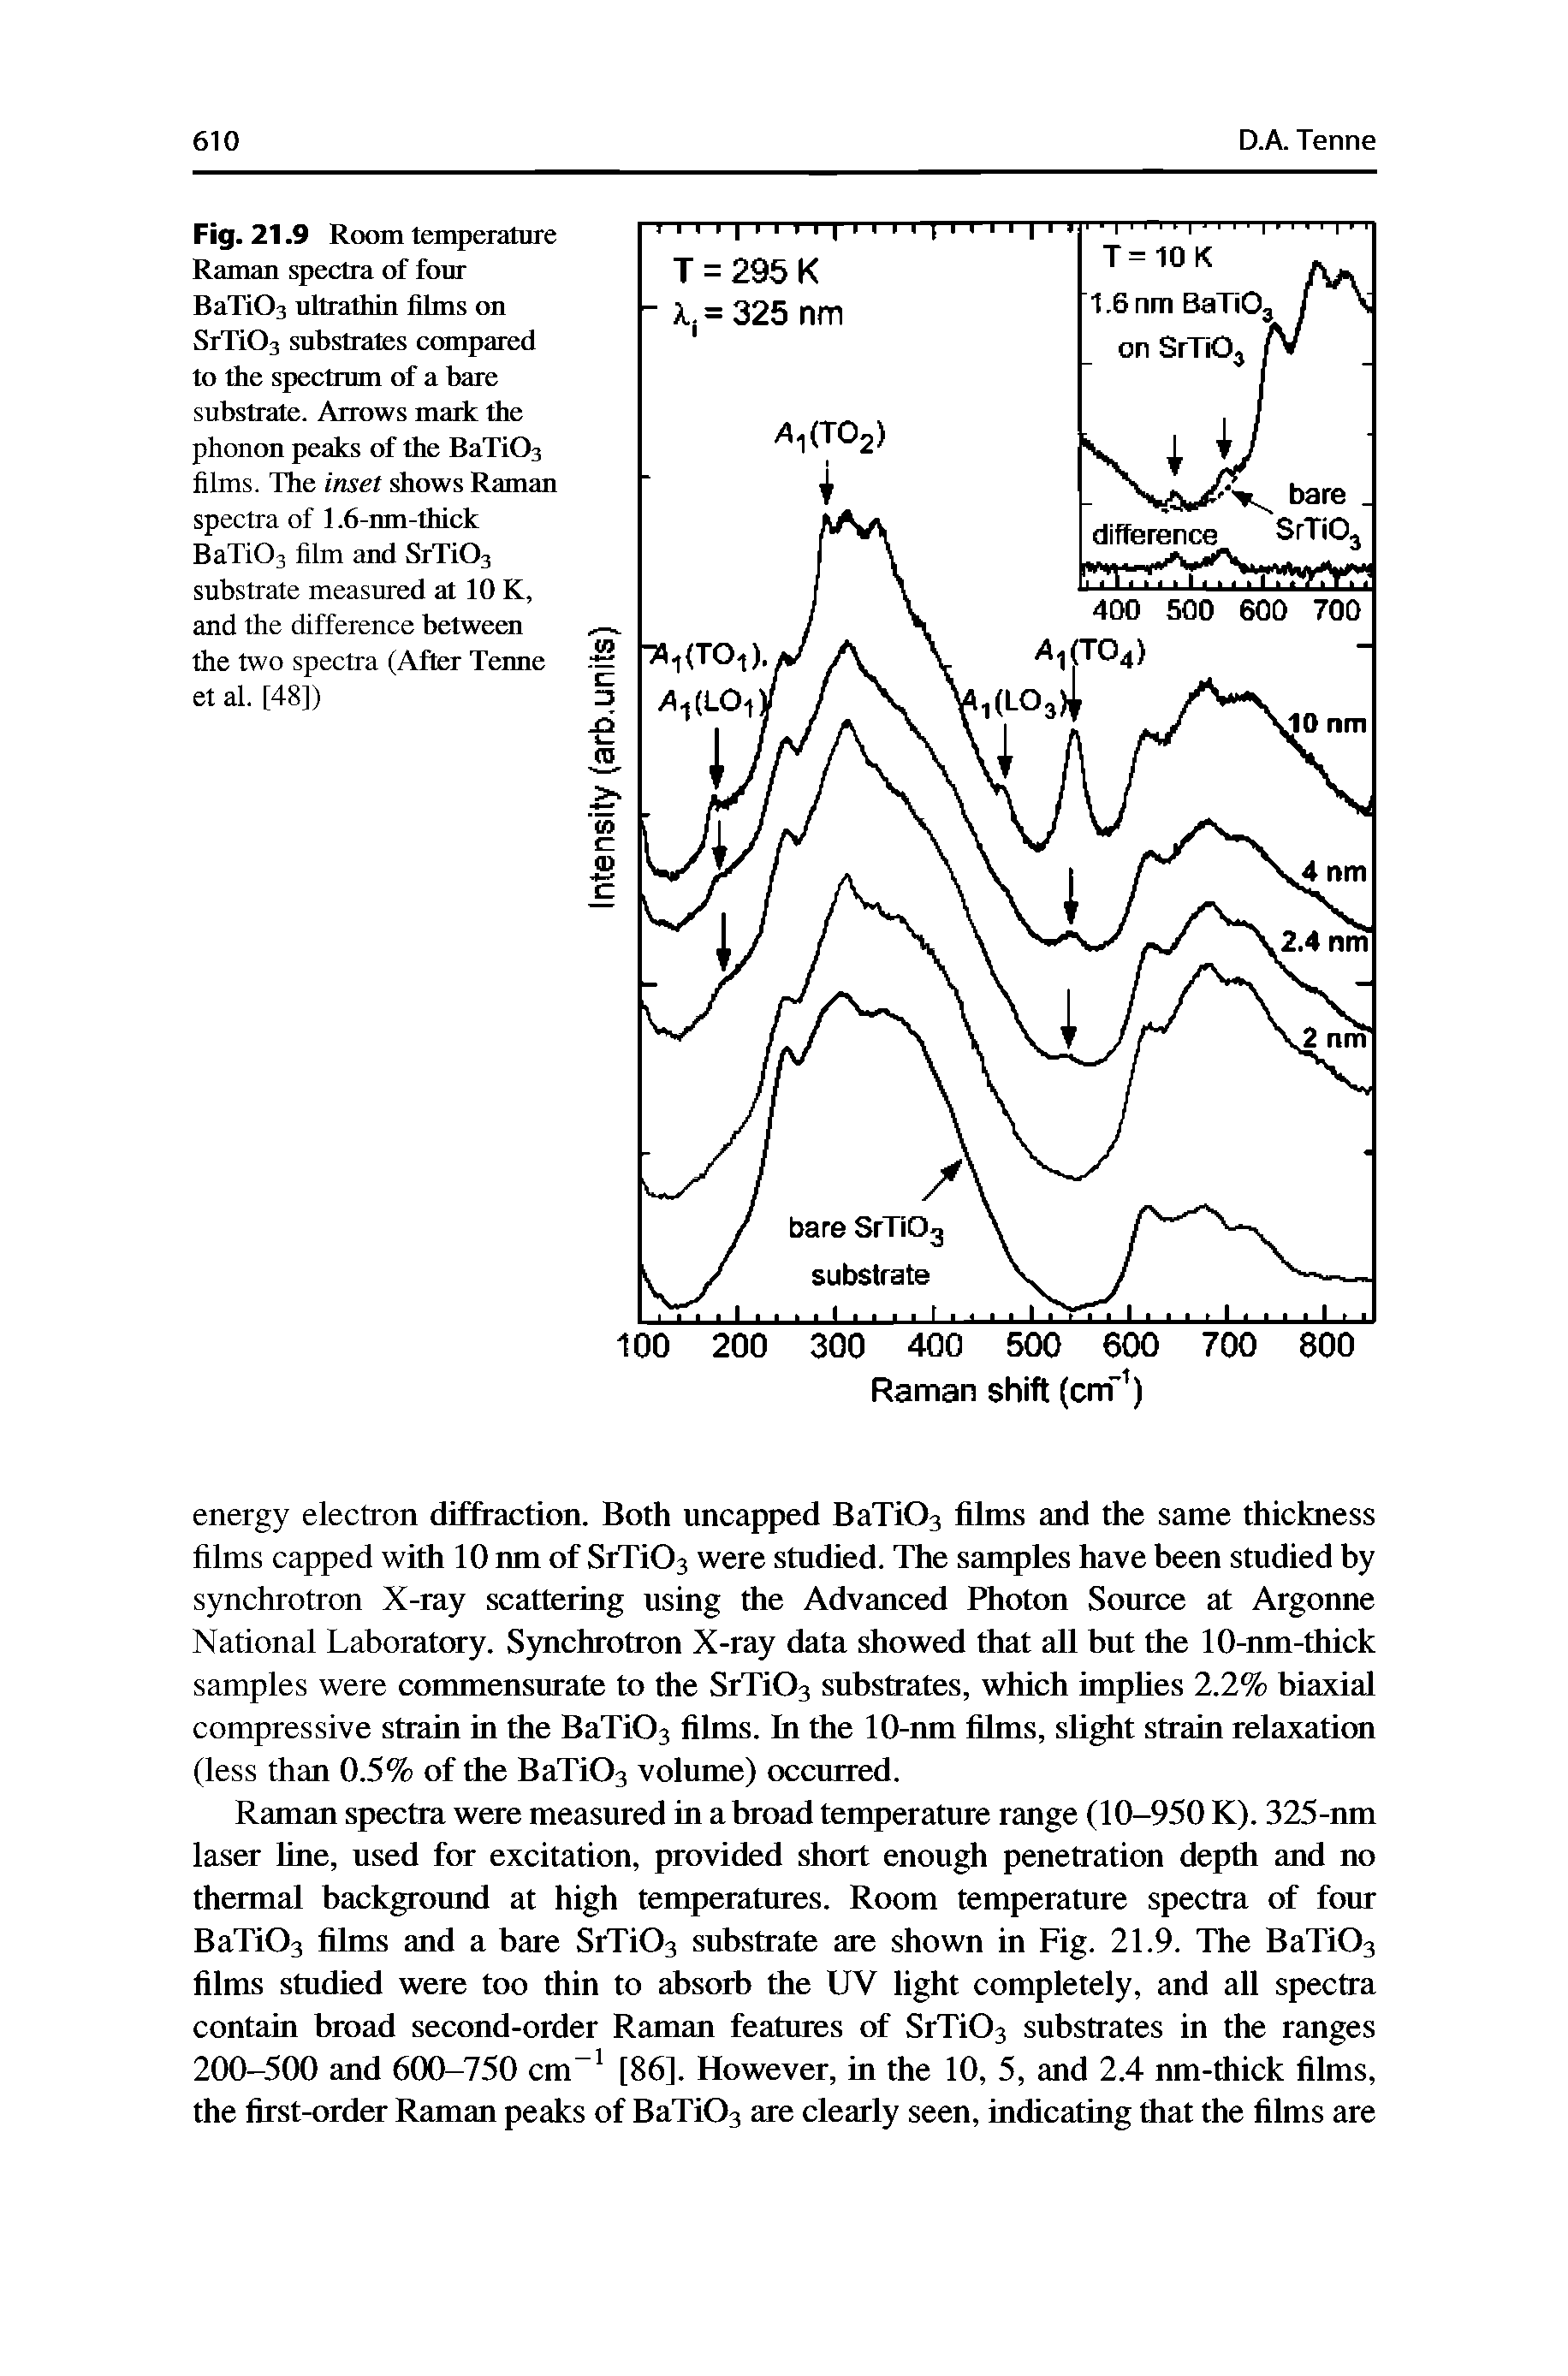 Fig. 21.9 Room temperature Raman spectra of four BaTiOs ultrathin films on SrTi03 substrates compared to the spectrum of a bare substrate. Arrows mark the phonon peaks of the BaTiOs films. The inset shows Raman spectra of 1.6-nm-thick BaTi03 film and SrTi03 substrate measured at 10 K, and the difference between the two spectra (After Tenne et al. [48])...